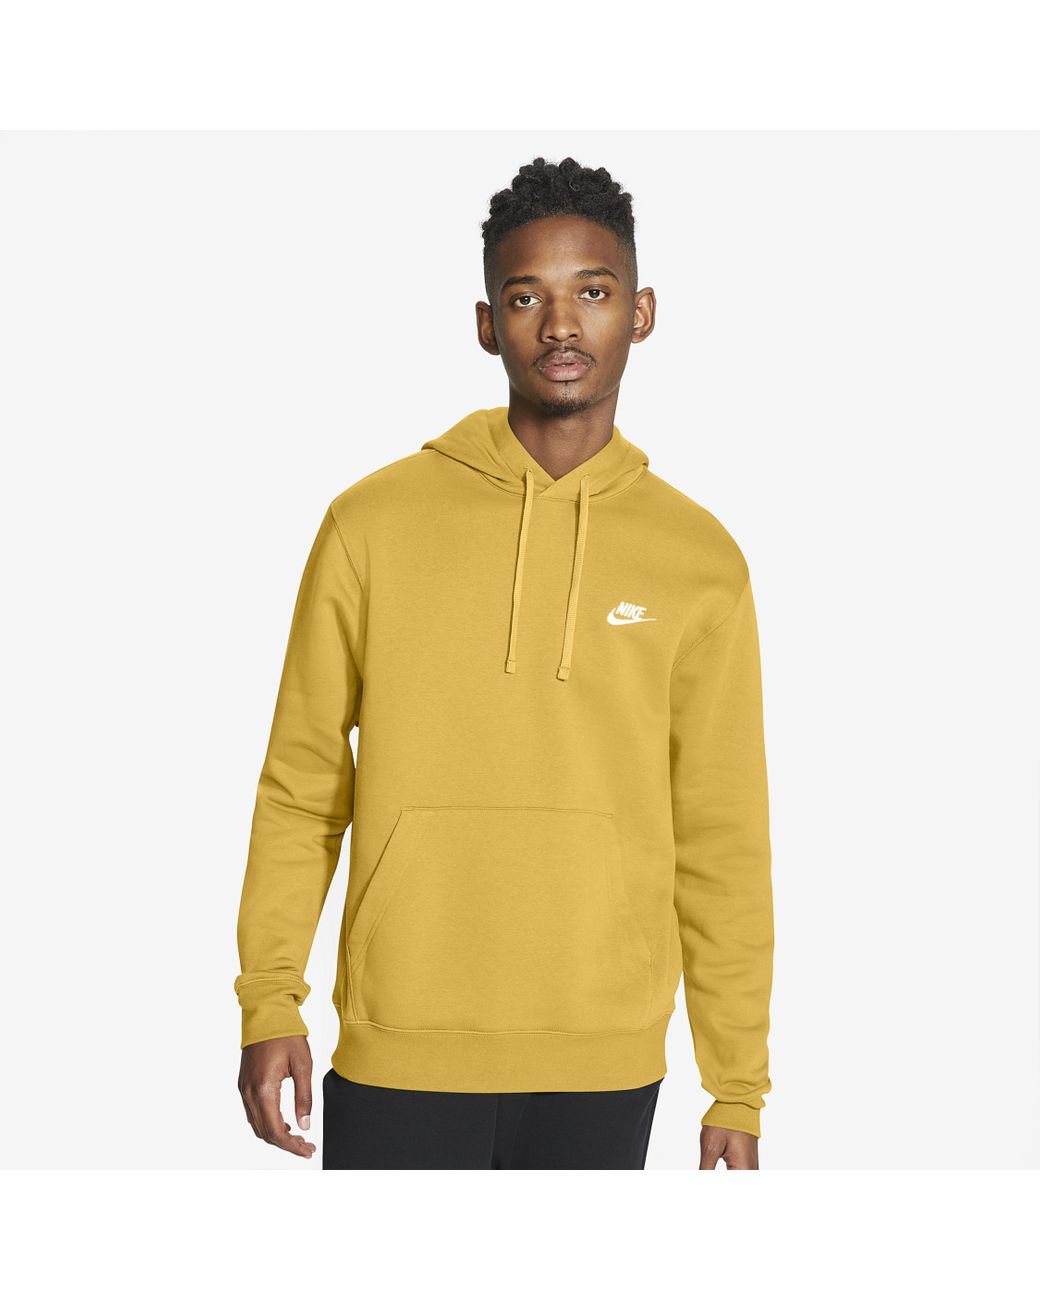 Nike Cotton Club Pullover Hoodie in Yellow for Men - Lyst